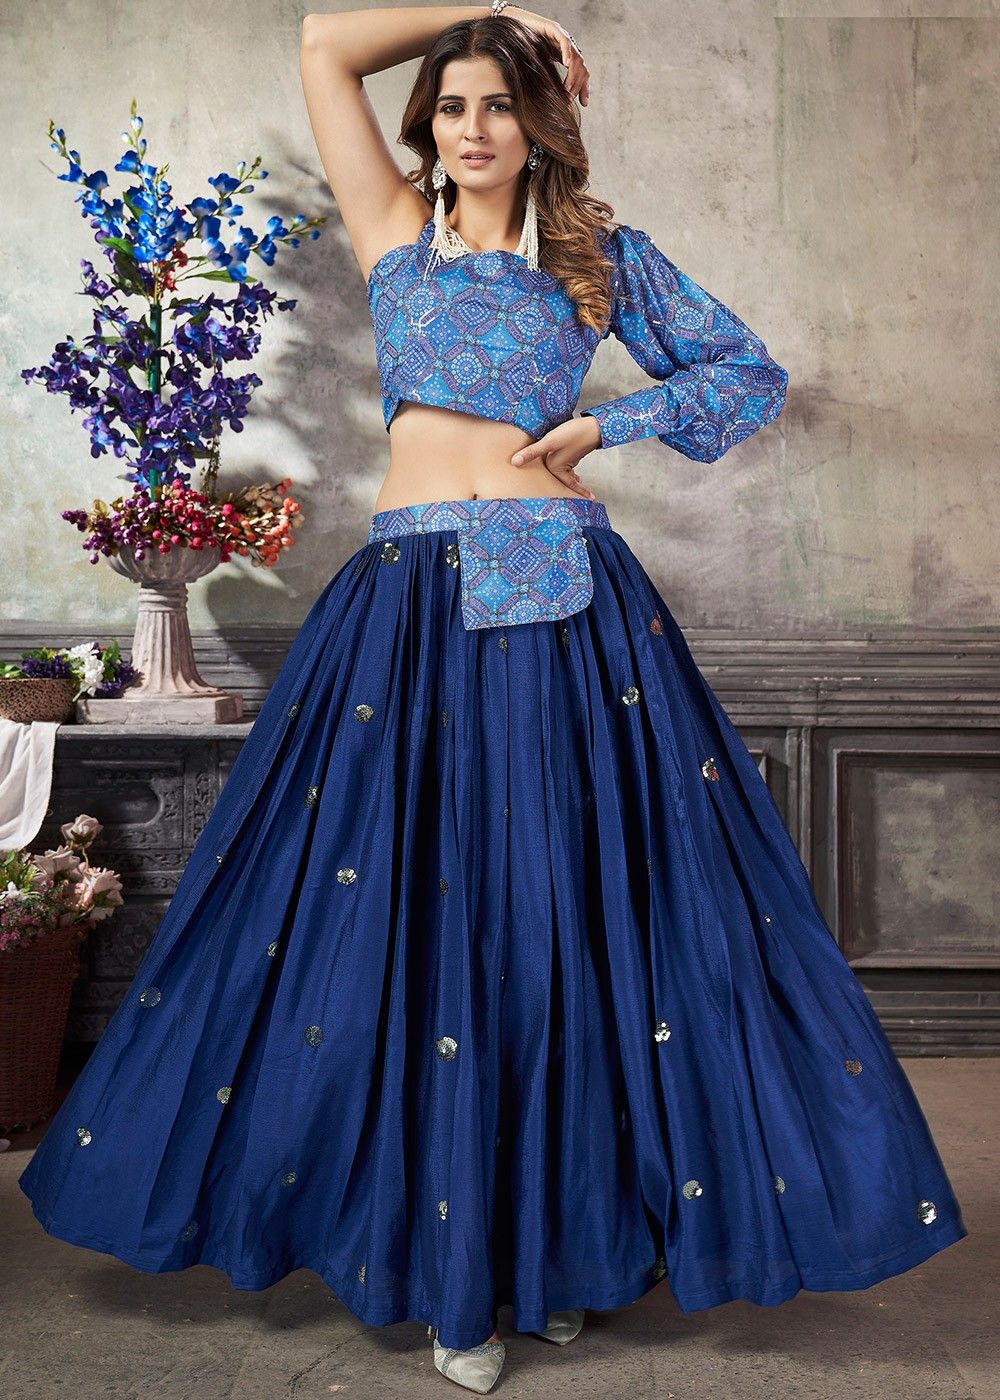 Royal Blue and Gold Printed Top with Saree Skirt